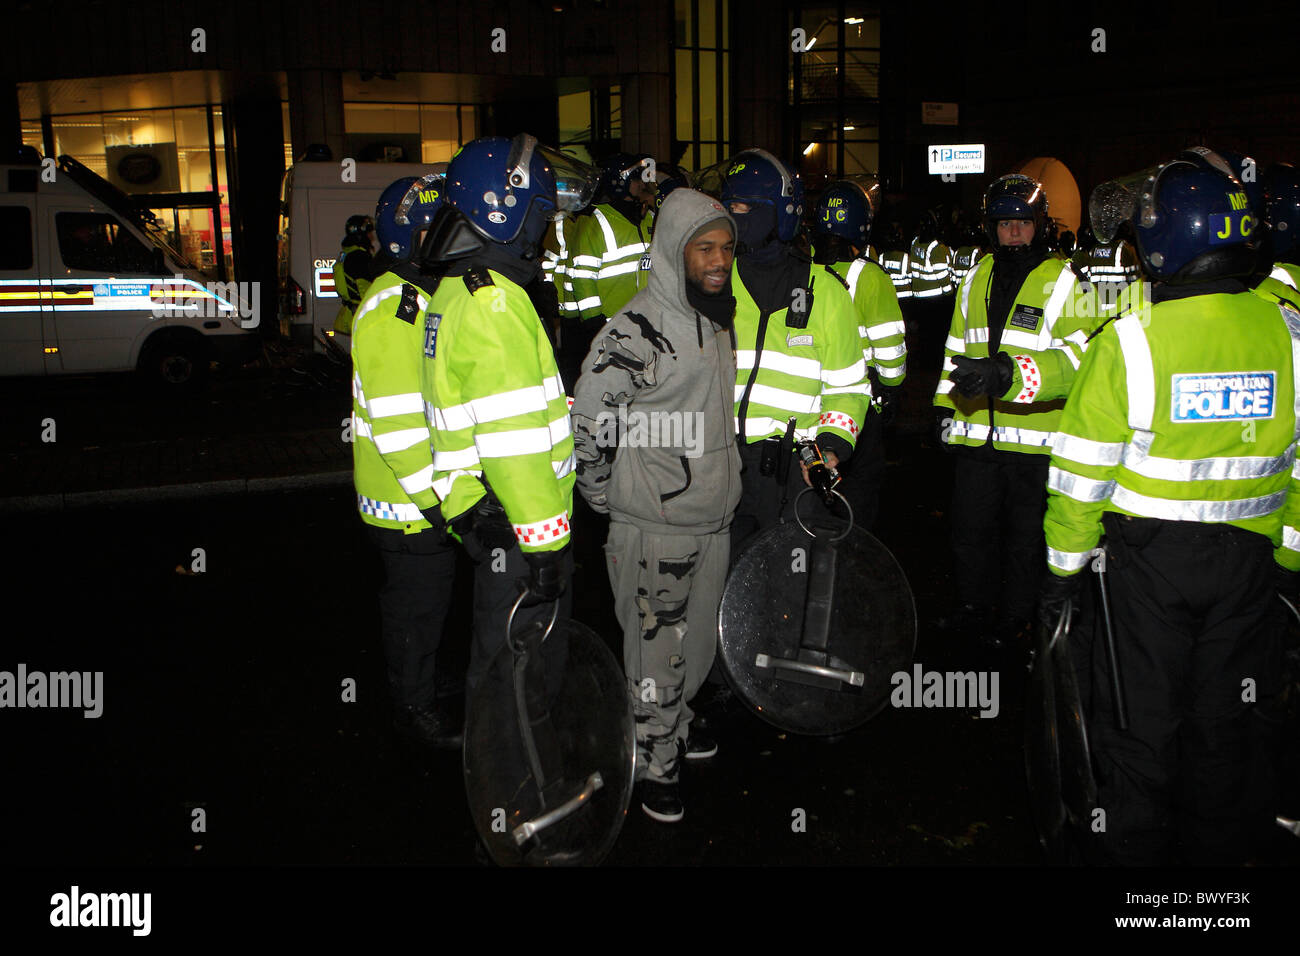 Police arrest young black male at student protest in London Stock Photo